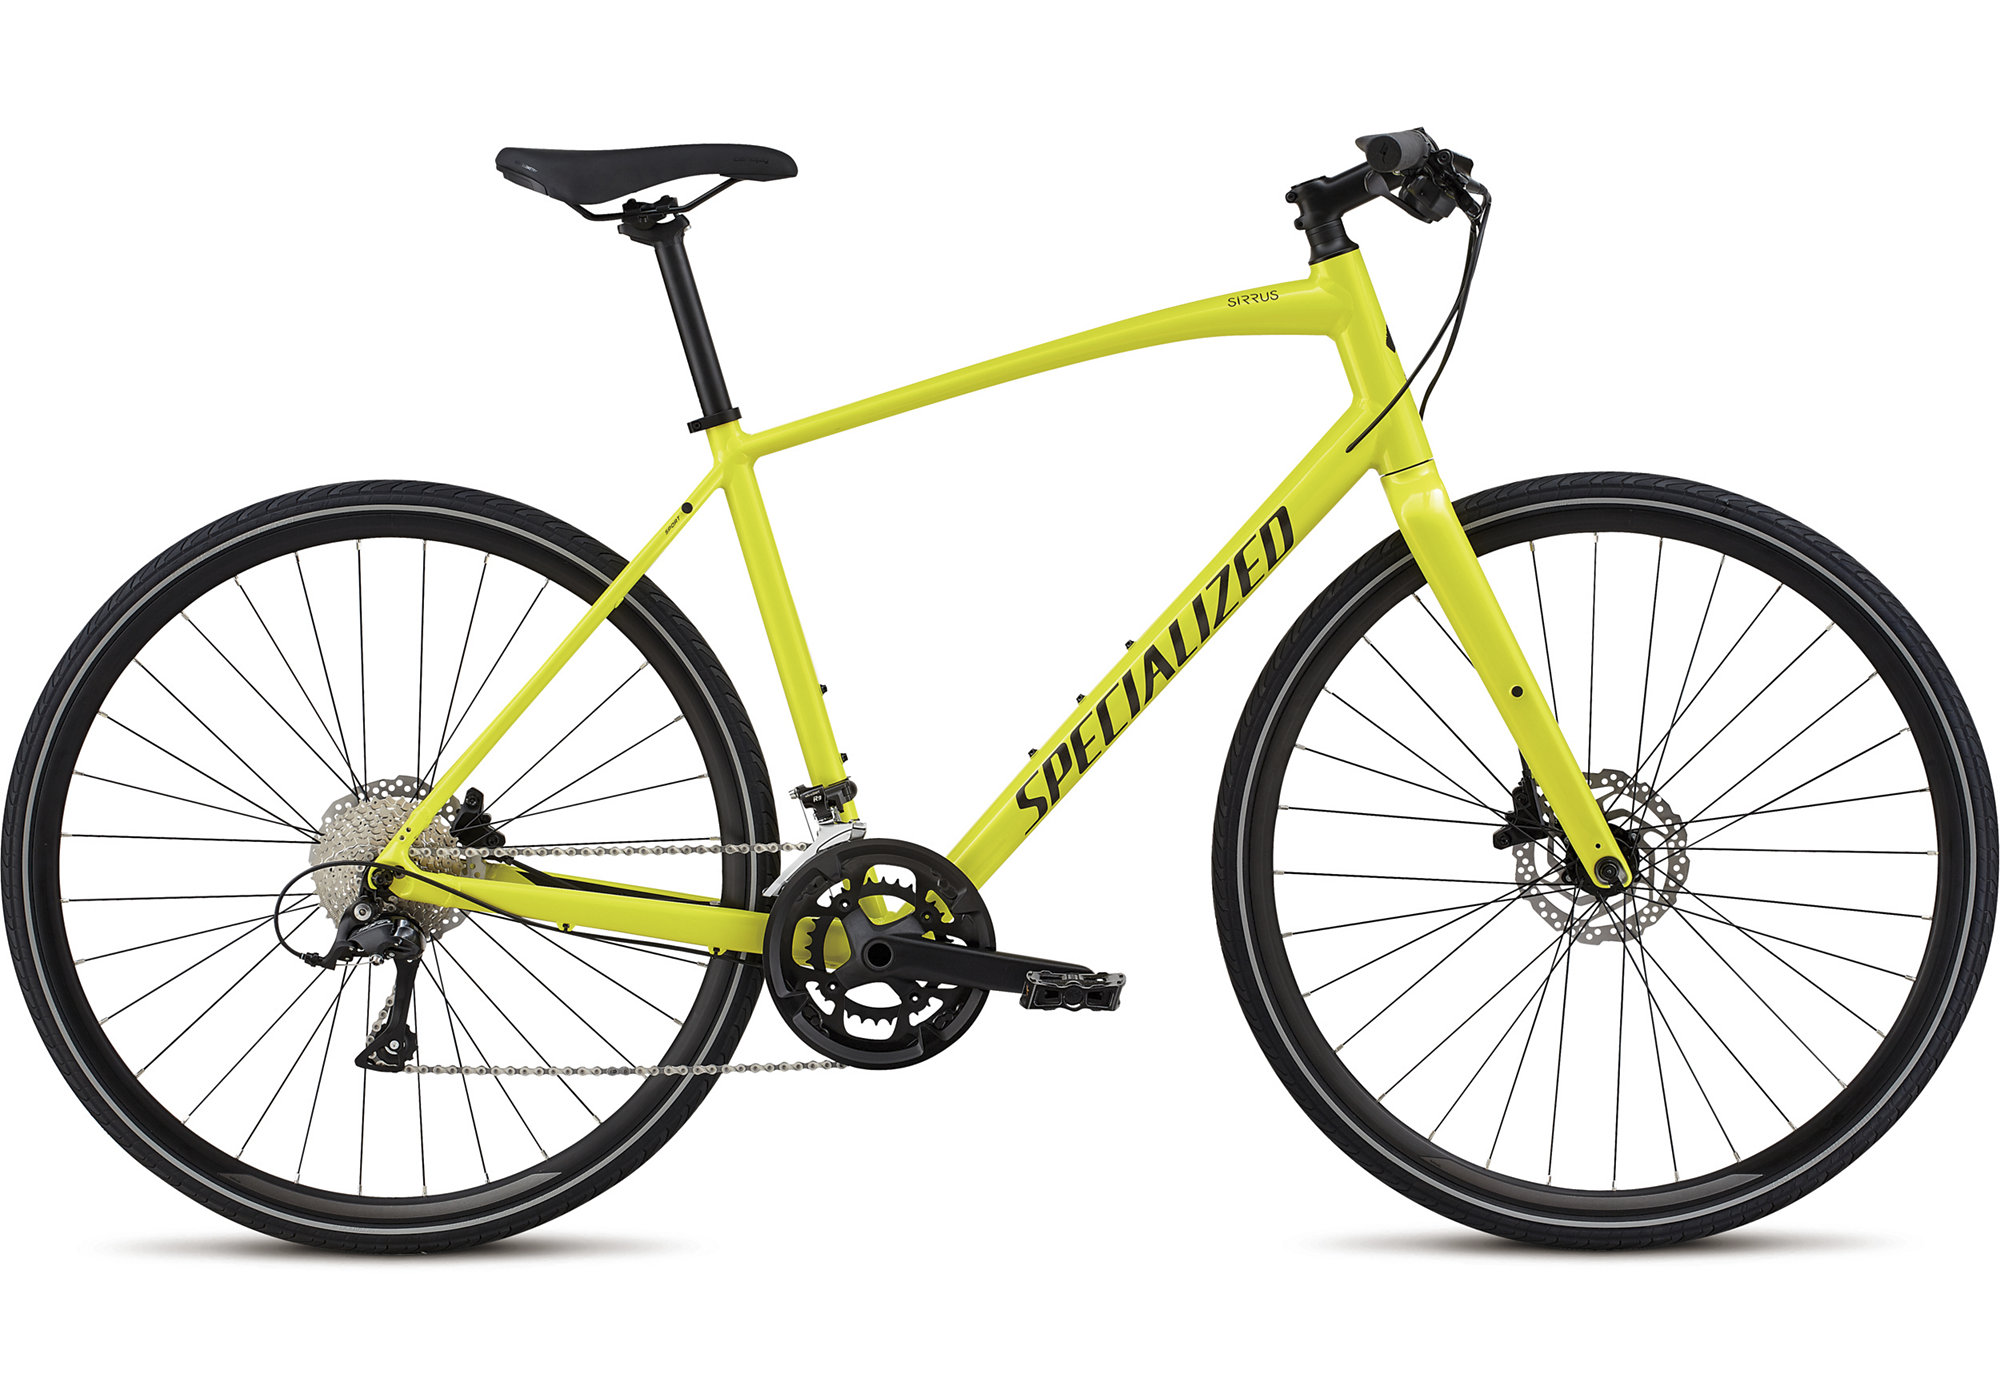 Specialized Men's Sirrus Sport - Friendly knowledgeable full